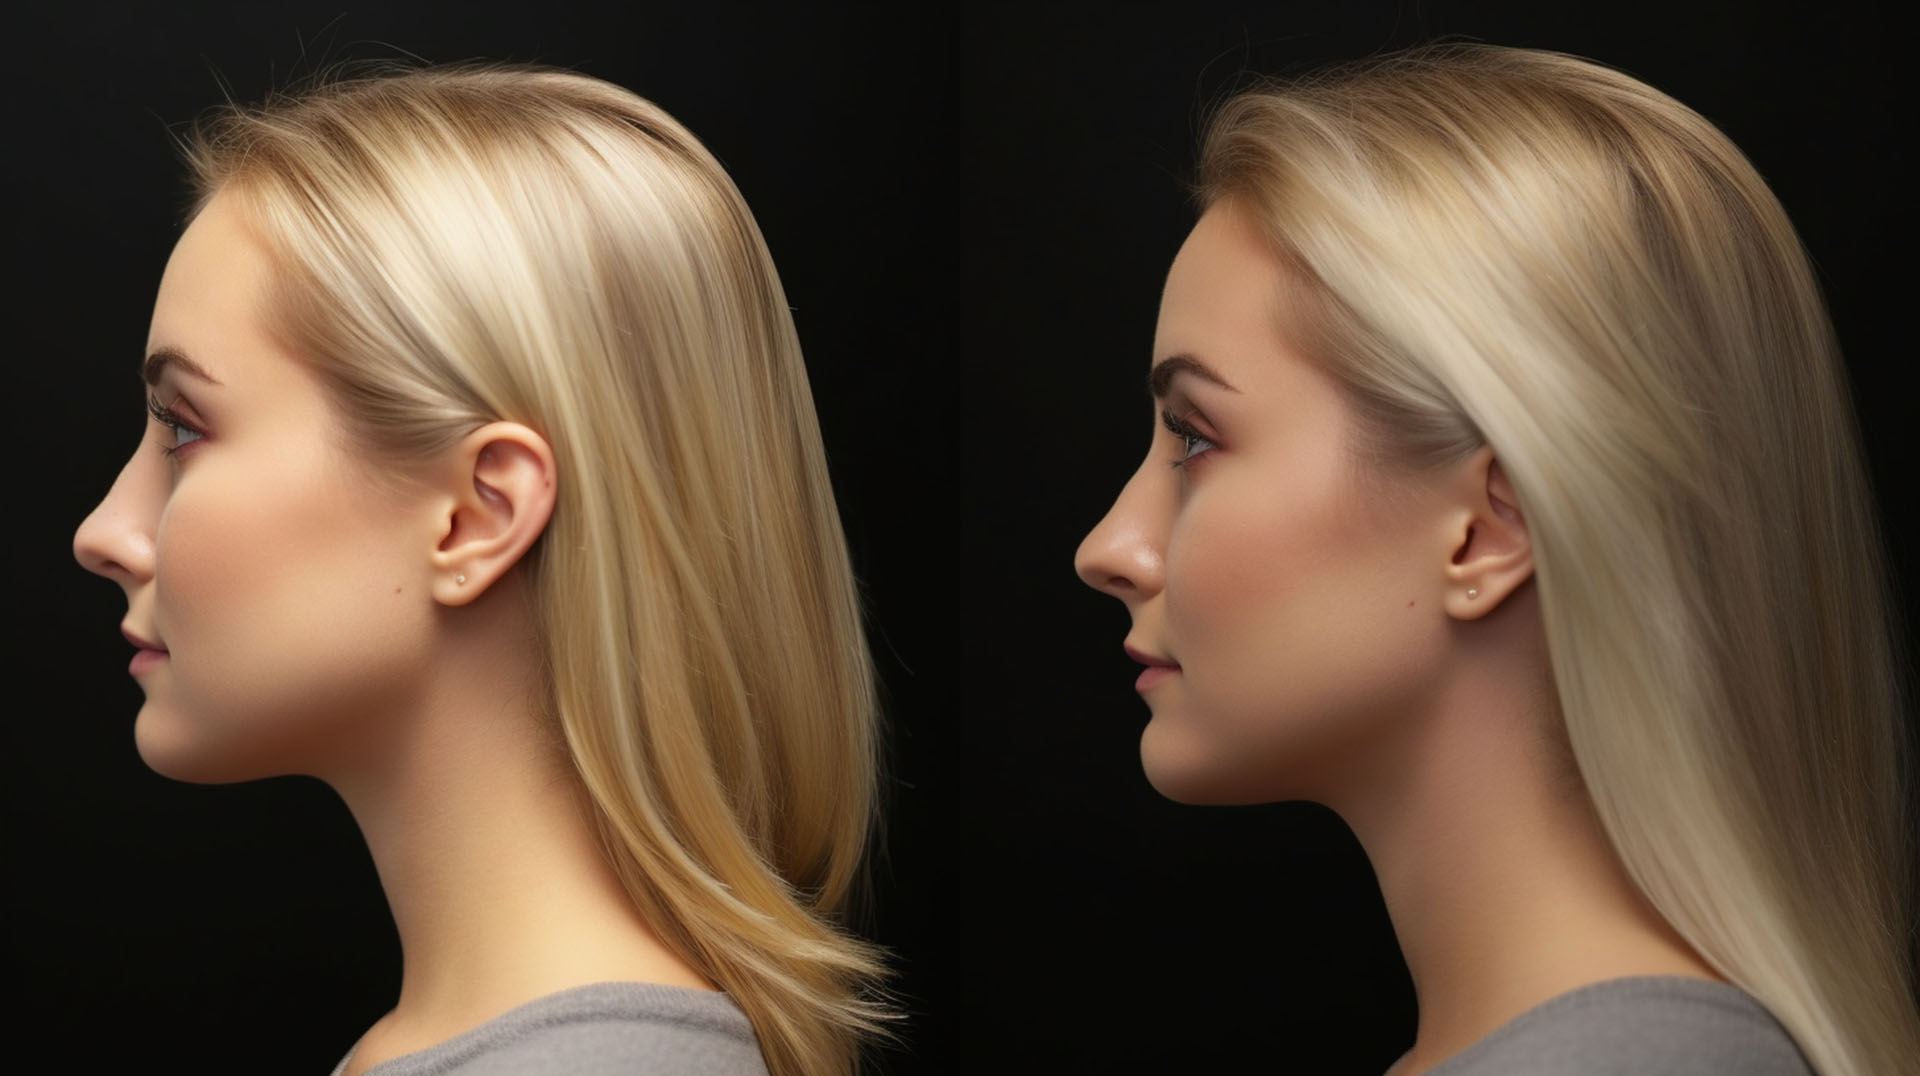 Rhinoplasty Before and After Photo London